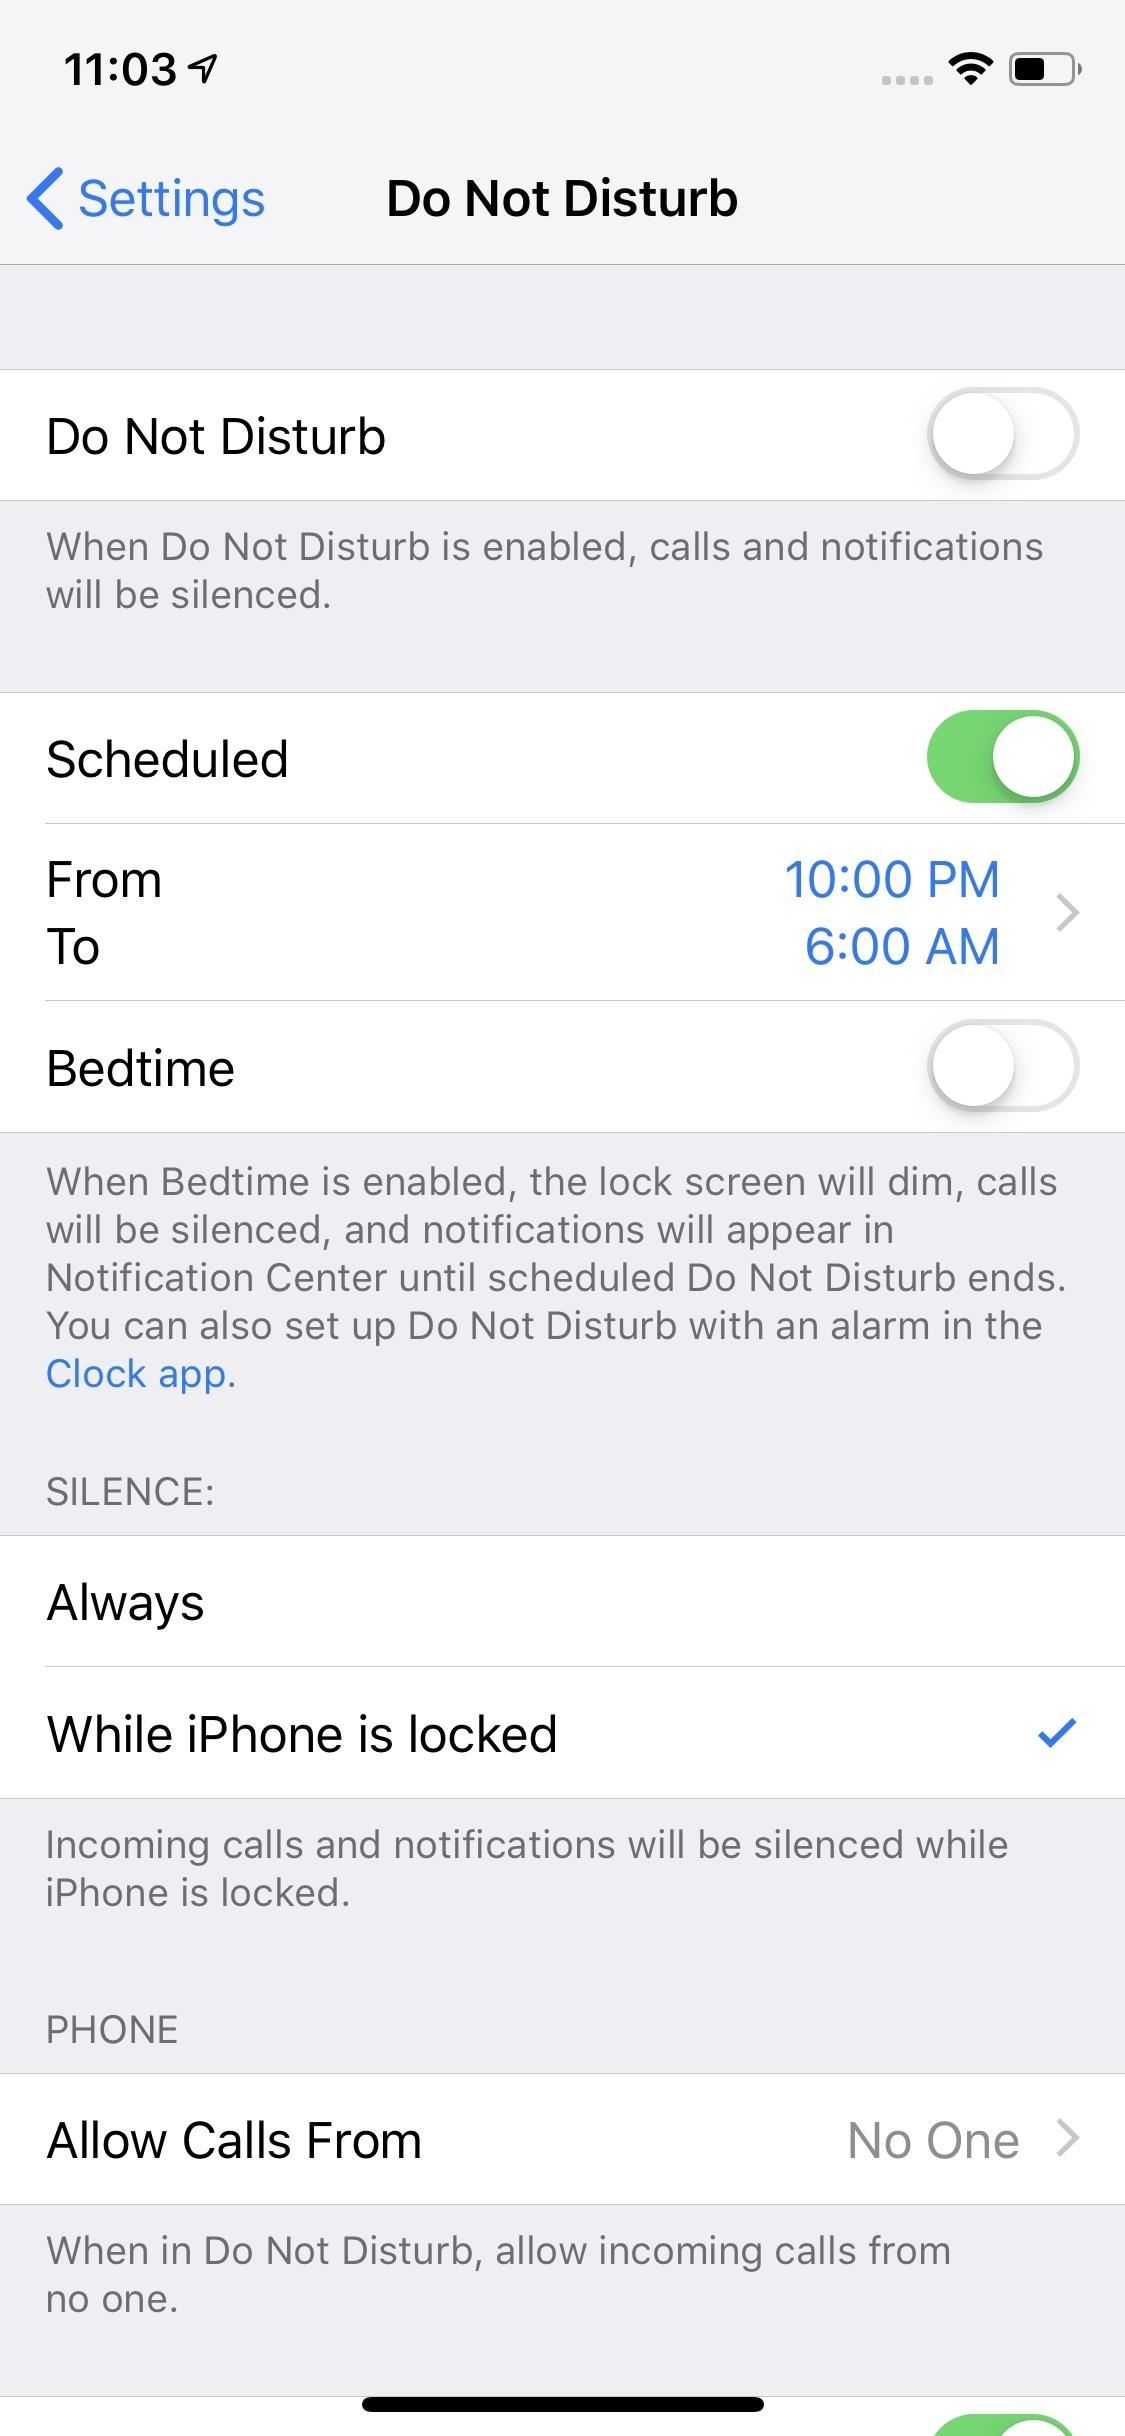 How to Disable the 'Good Morning' Message on Your iPhone's Lock Screen